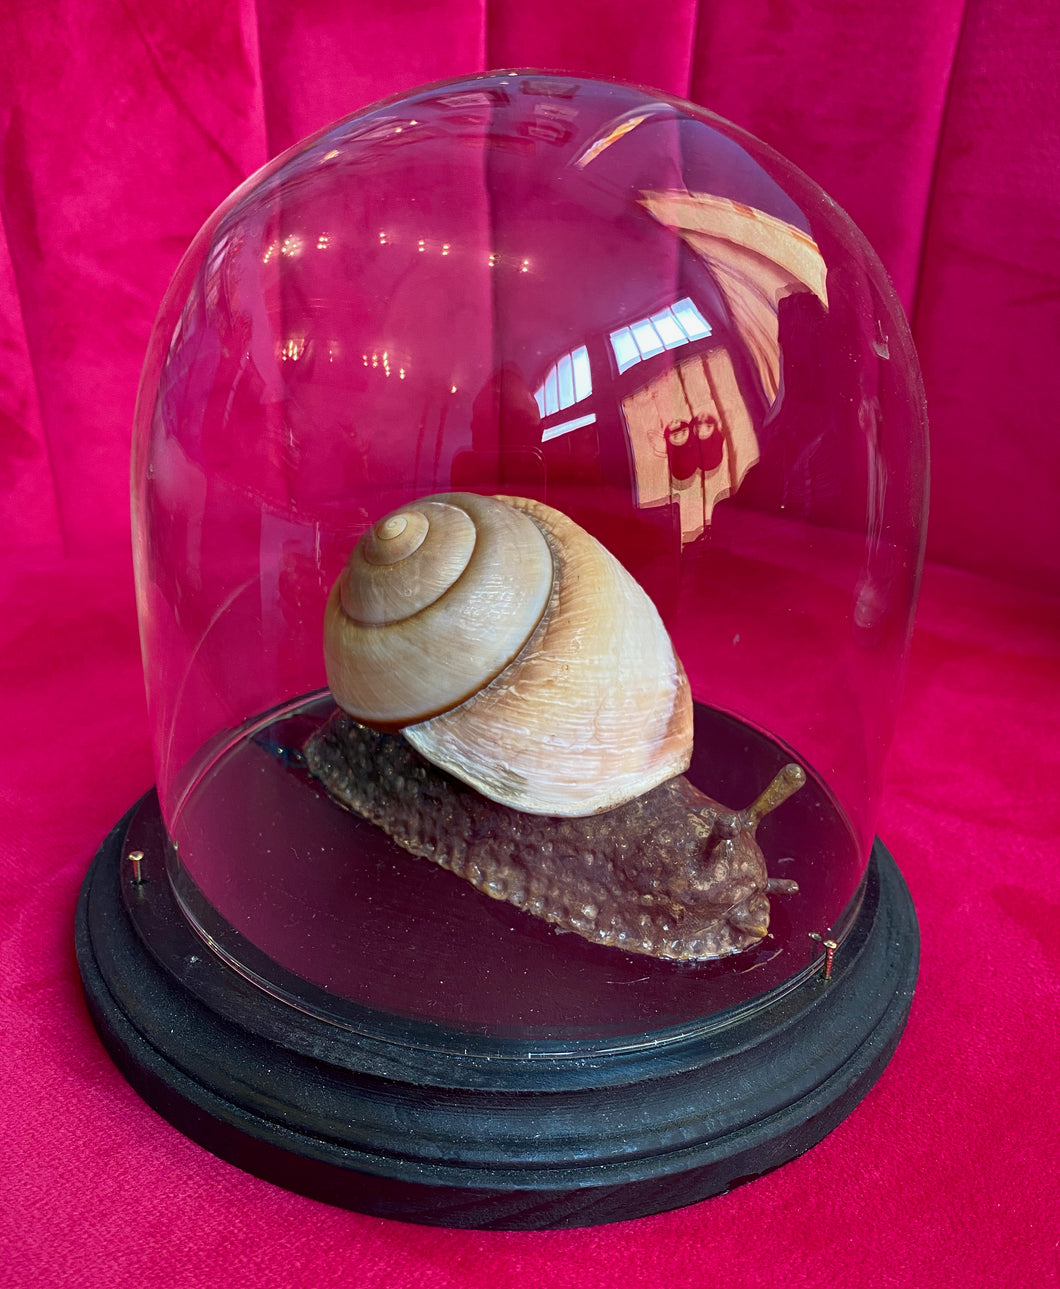 Giant Snail in Display Dome made by Emily Binard